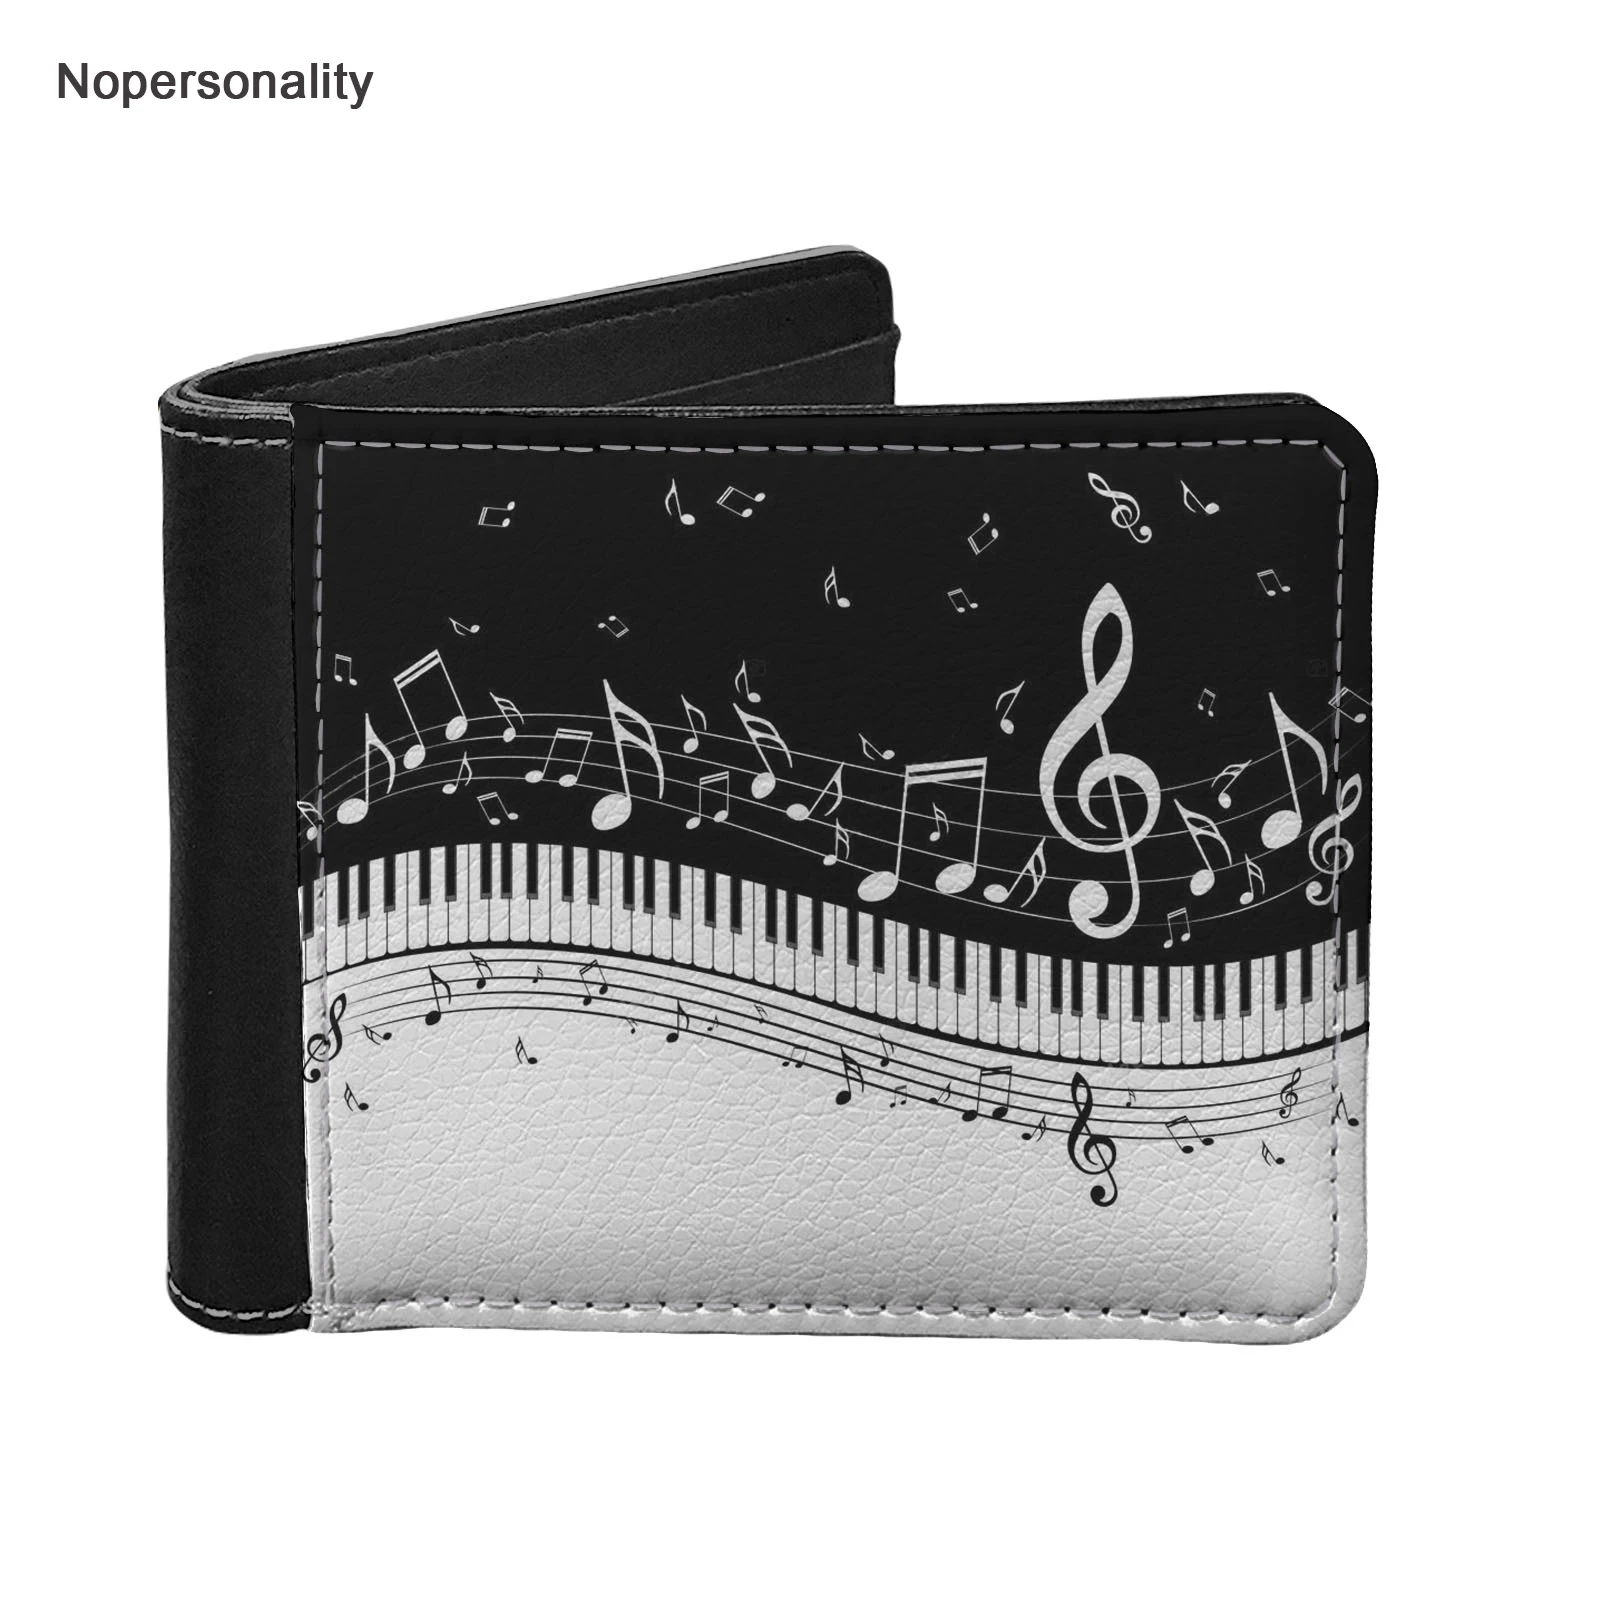 

Nopersonality Christmas Wallet Music Notes Print Mens Wallet Coin Purse Designer Black Pu Leather Credit Card Holder Money Bags